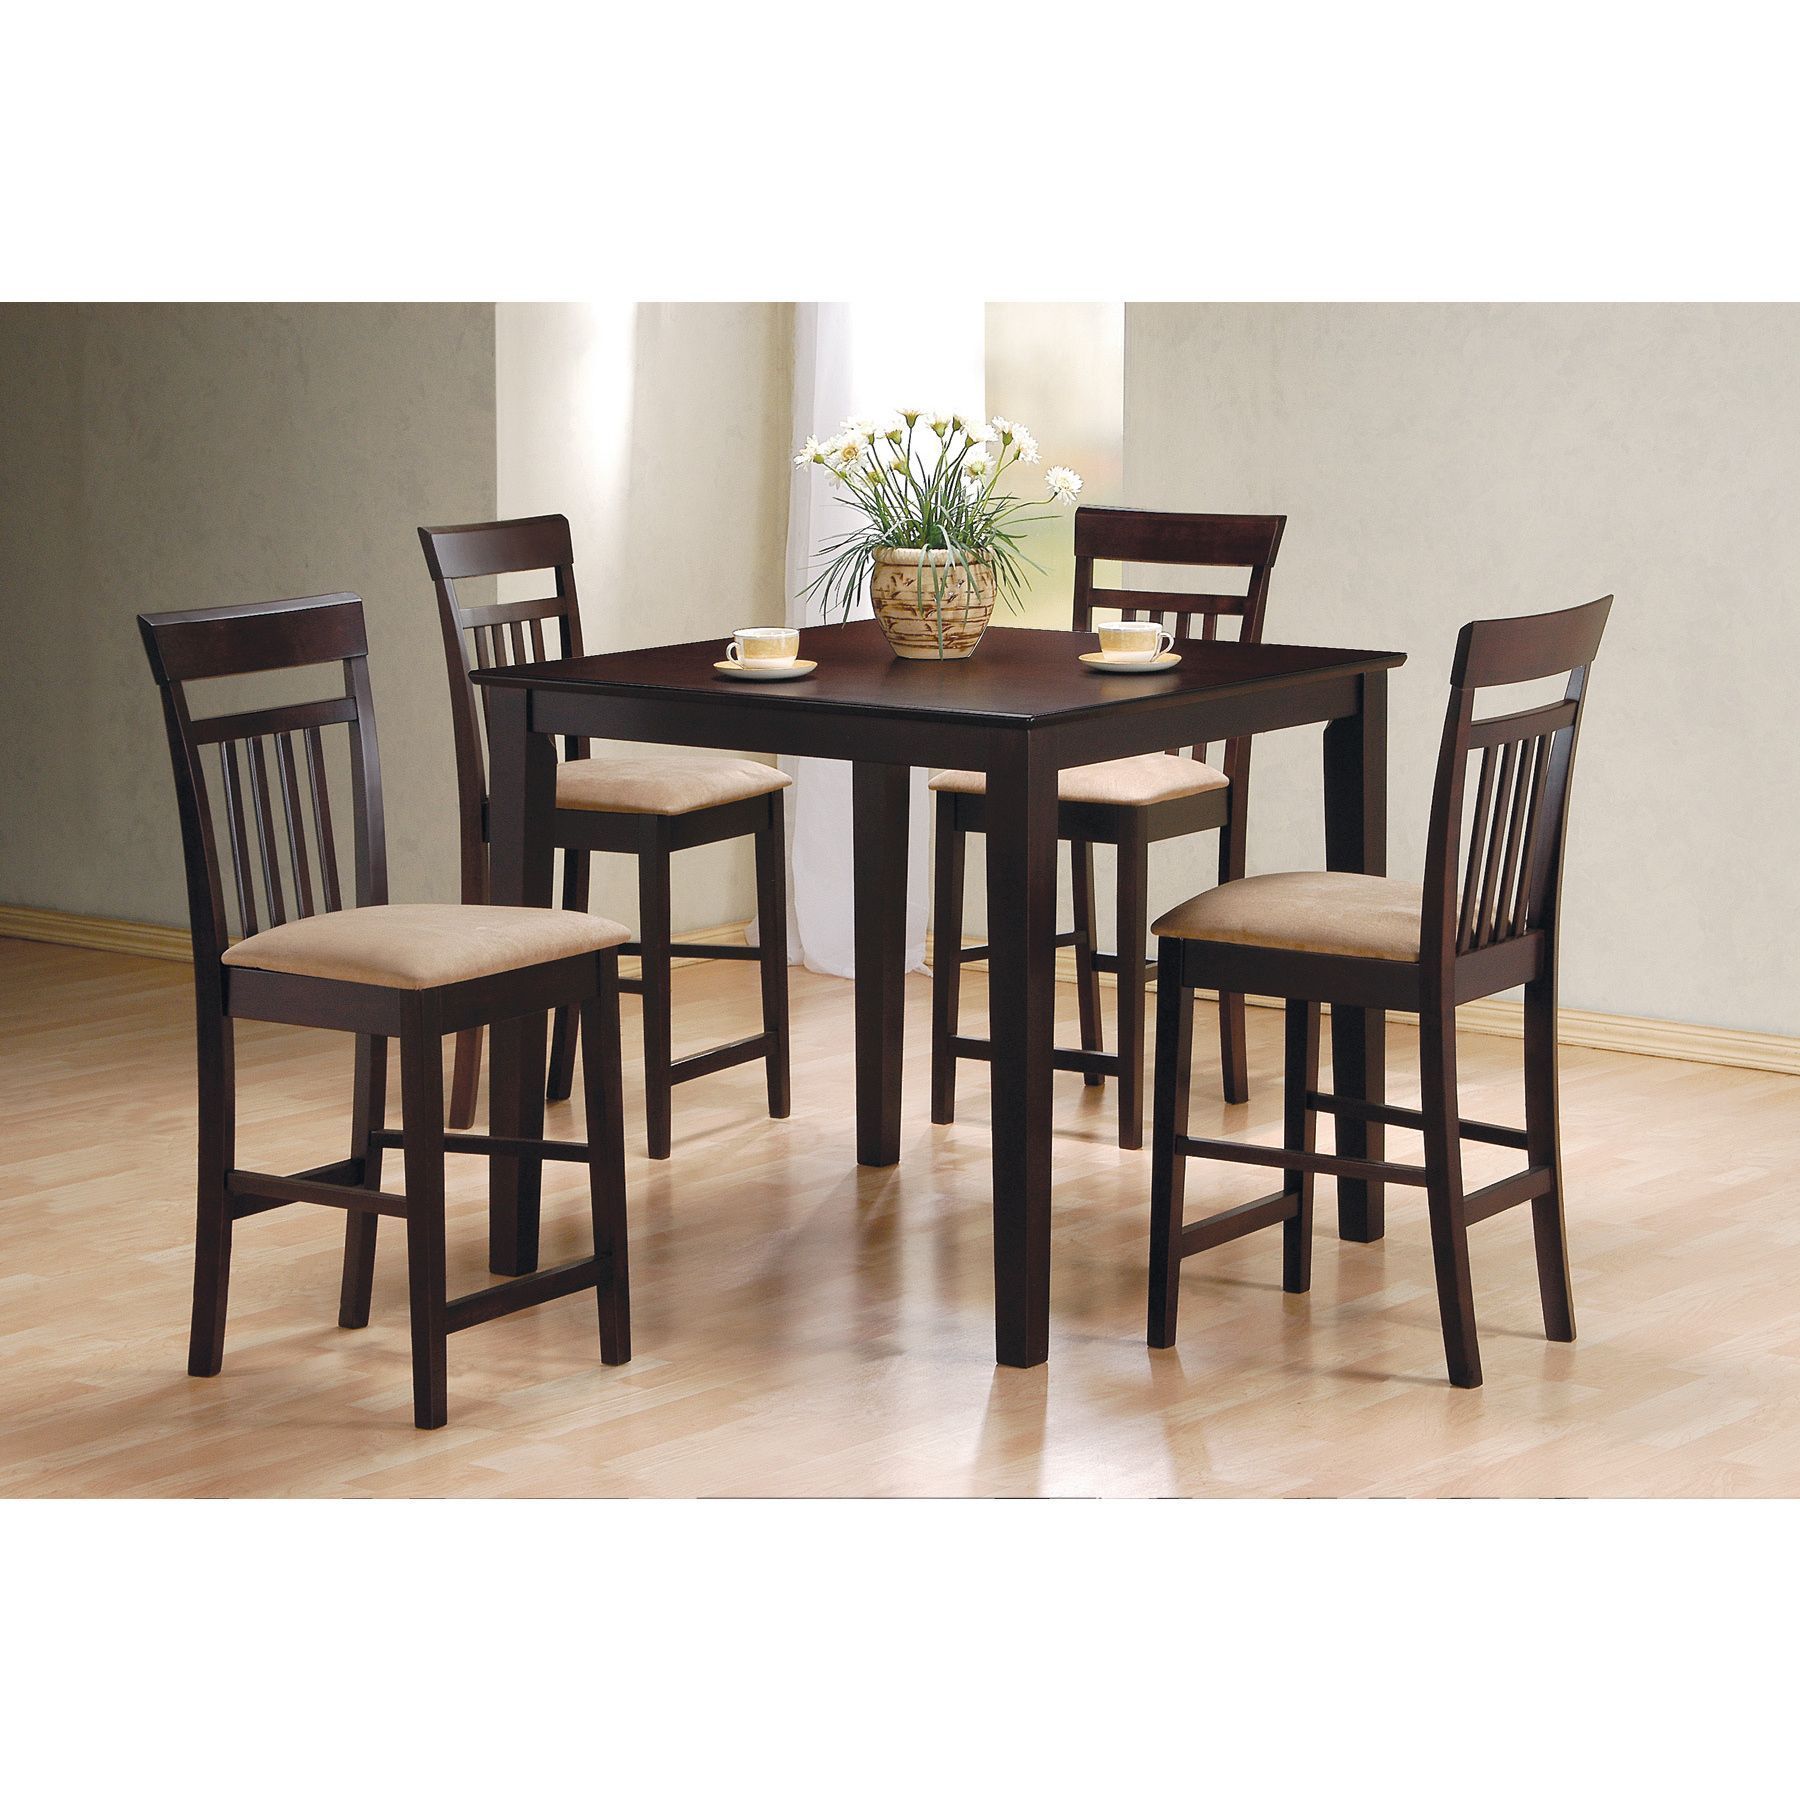 Coaster Company Cappuccino 5 Piece Dining Set (Cappuccino Counter Pertaining To Newest Miskell 5 Piece Dining Sets (View 7 of 20)